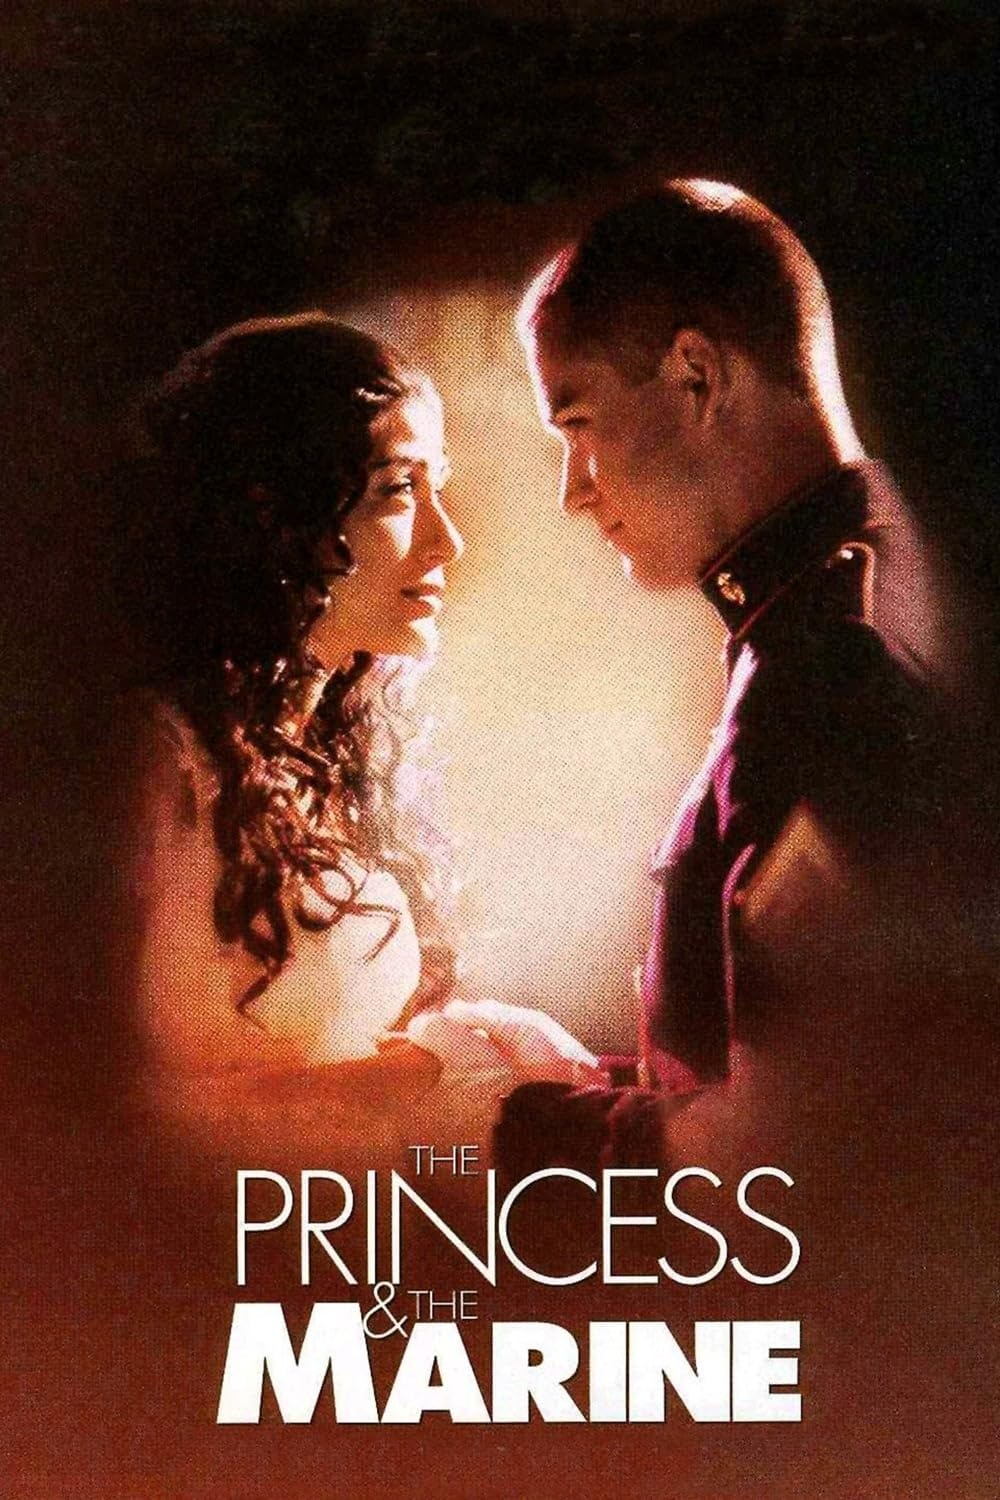 Promotional movie poster for the Princess and the Marine.